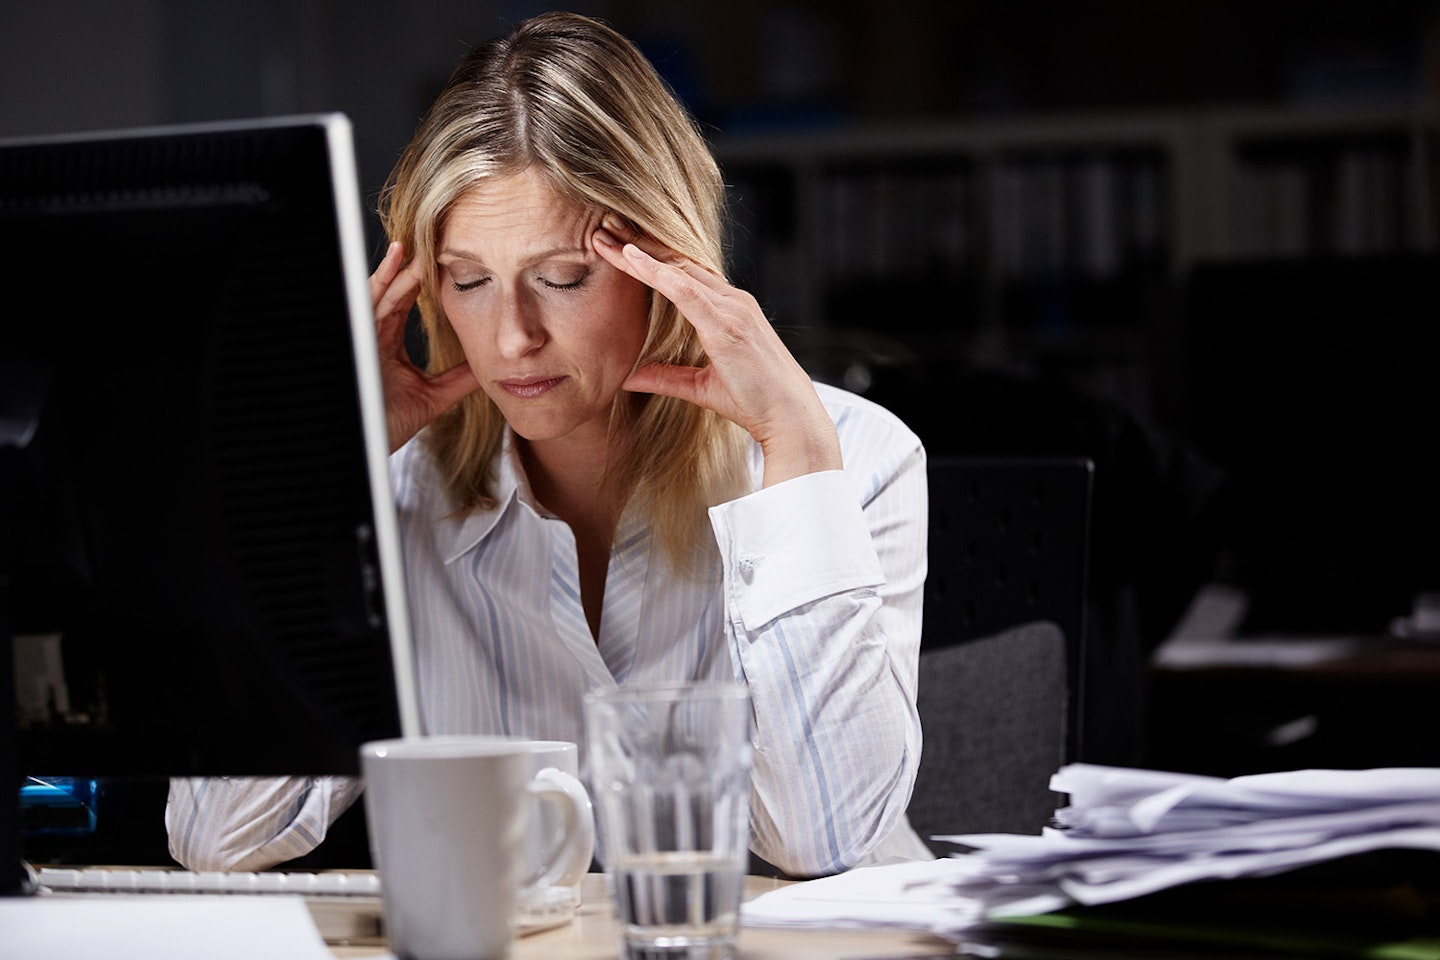 stressed woman, computer